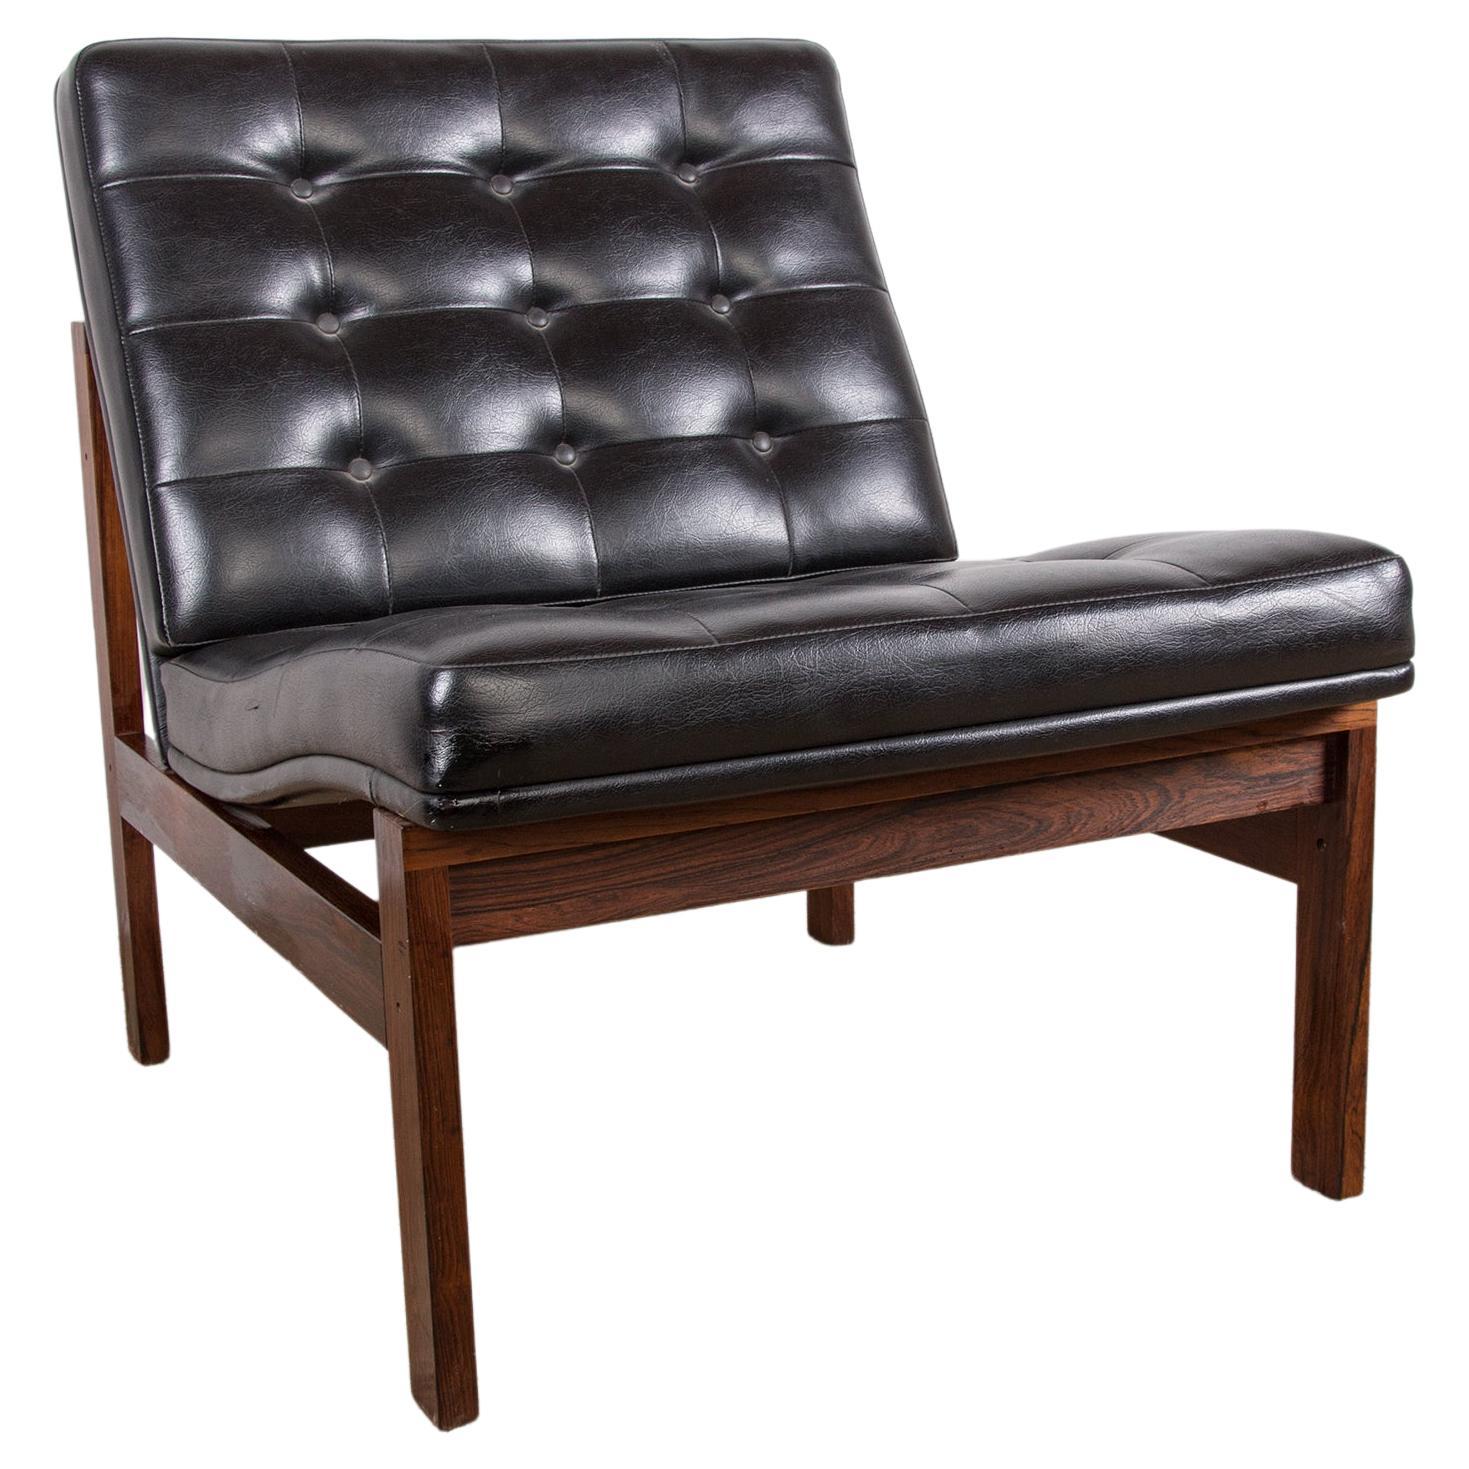 2 Danish Leather and Rosewood Armchairs Ole Gjerløv-Knudsen and Torben Lind.